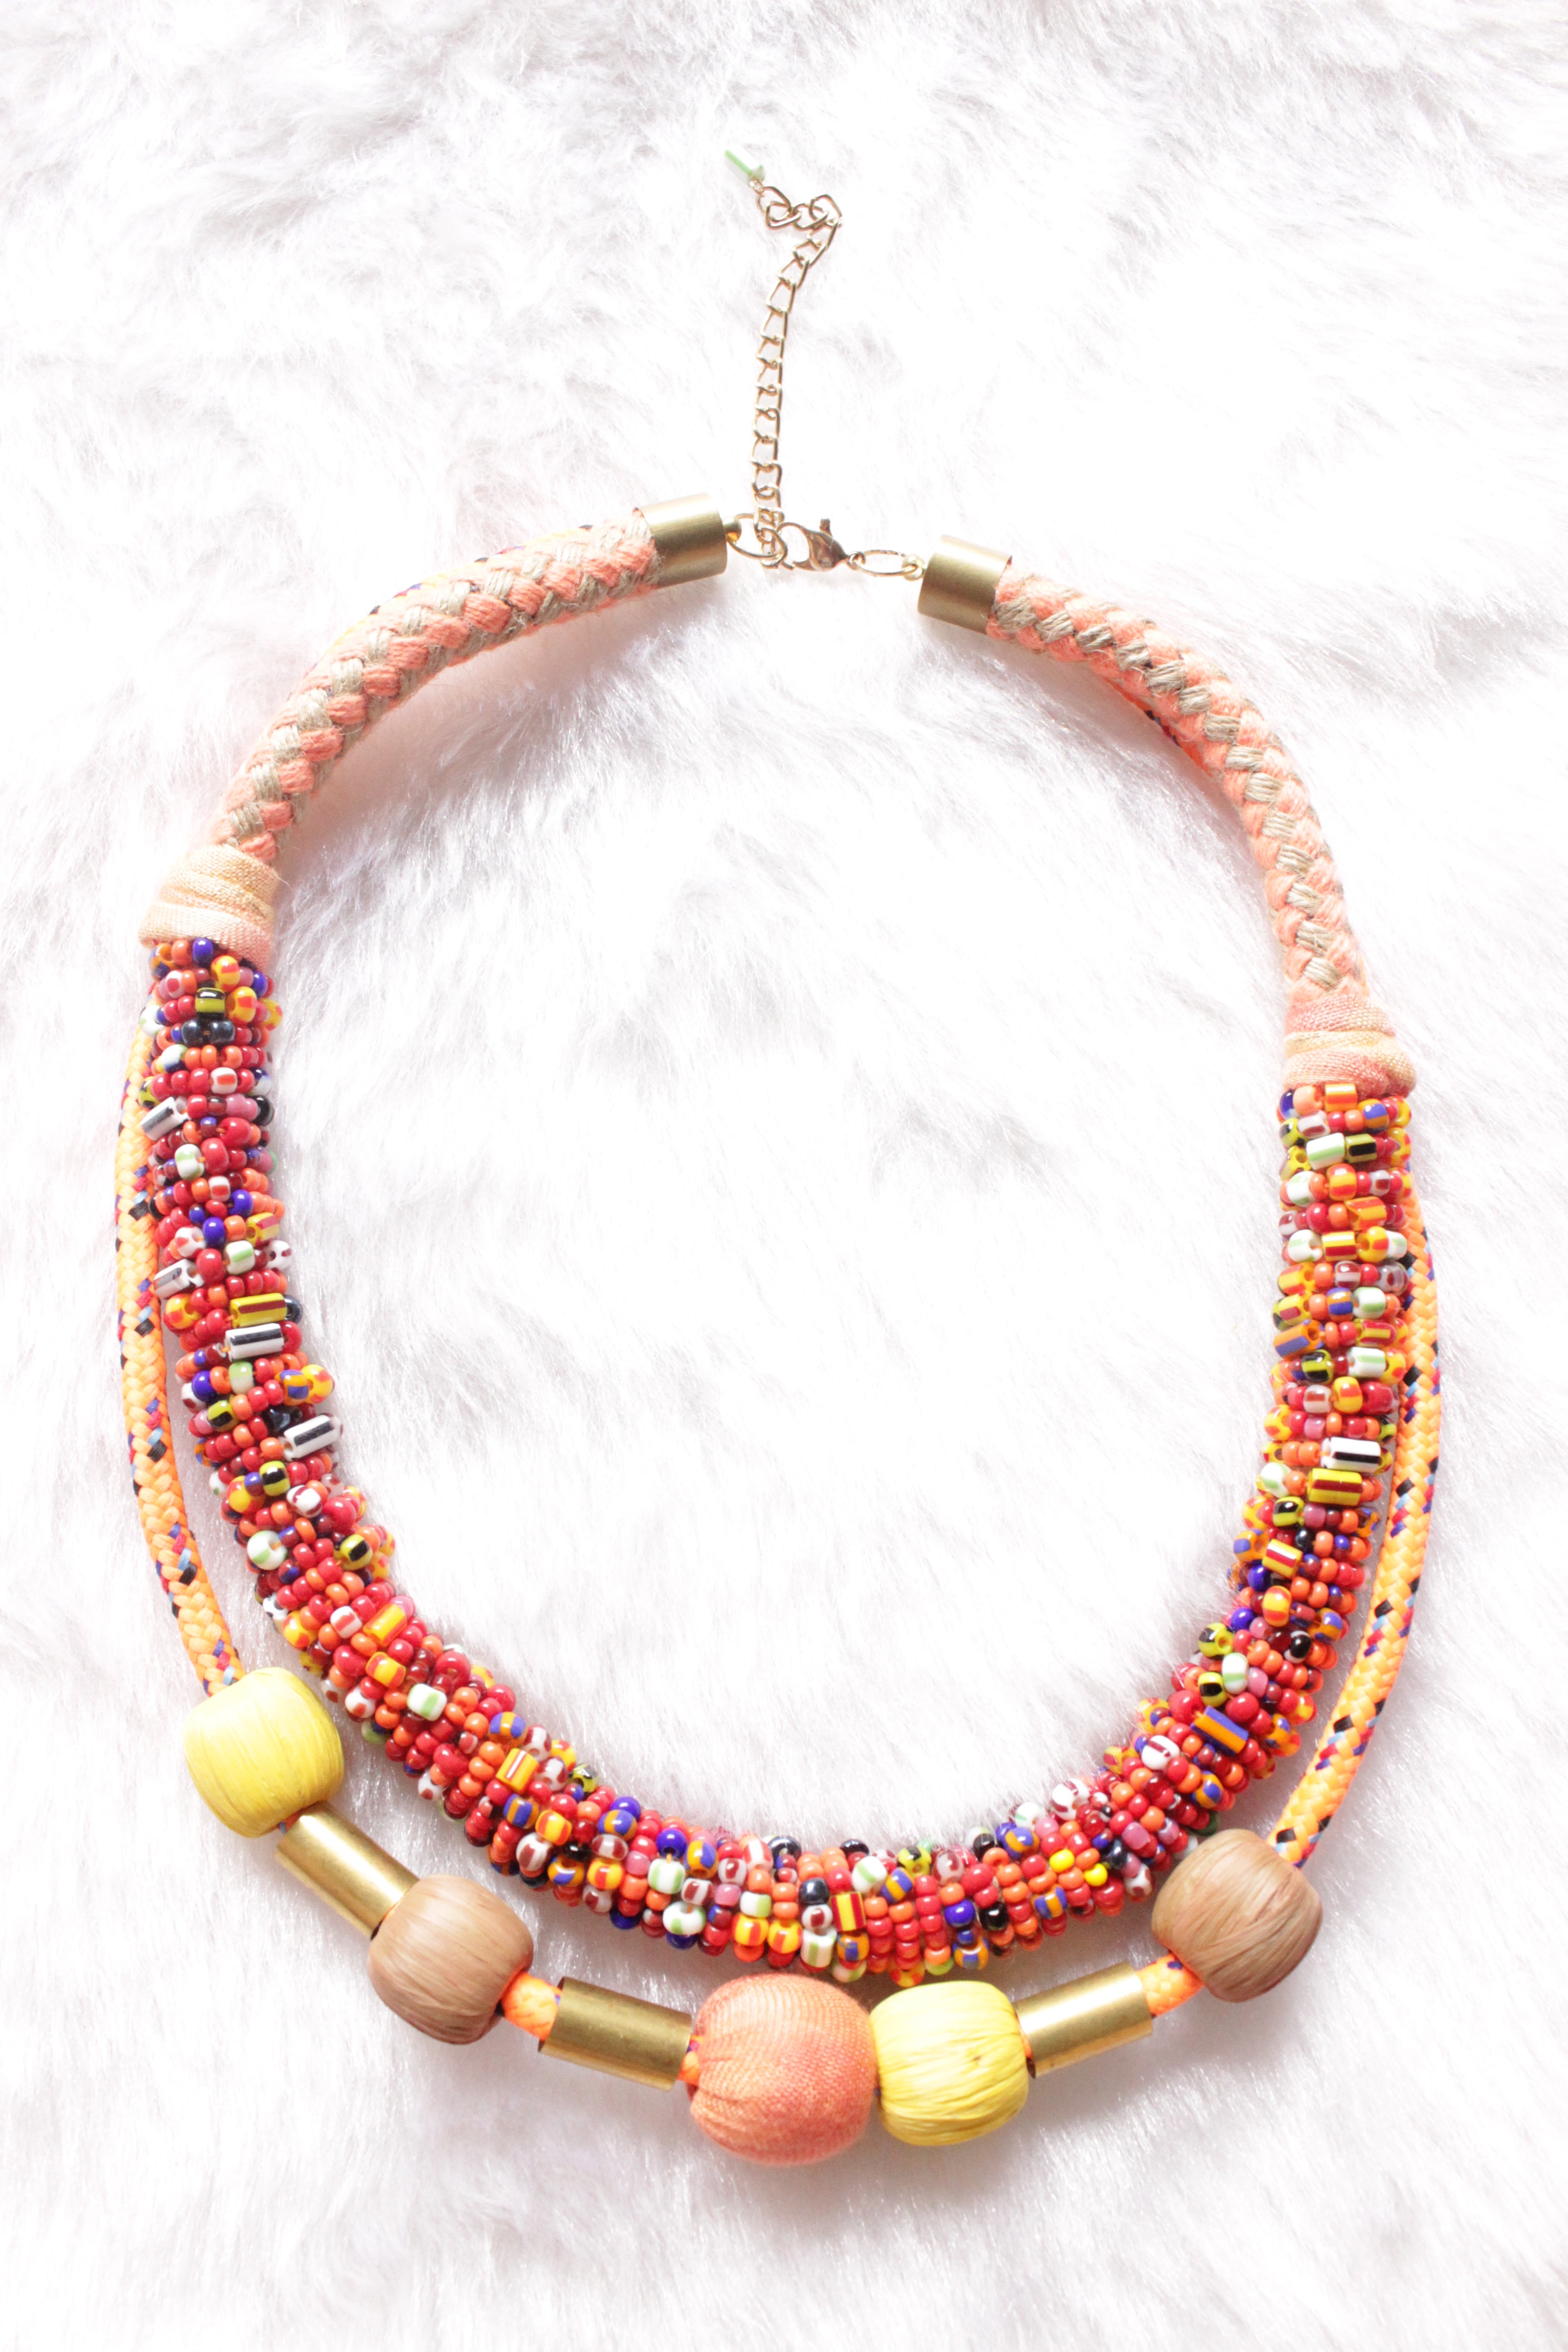 Multi-Color Beaded with Fabric Beads and Metal Charms 2 Layer Necklace